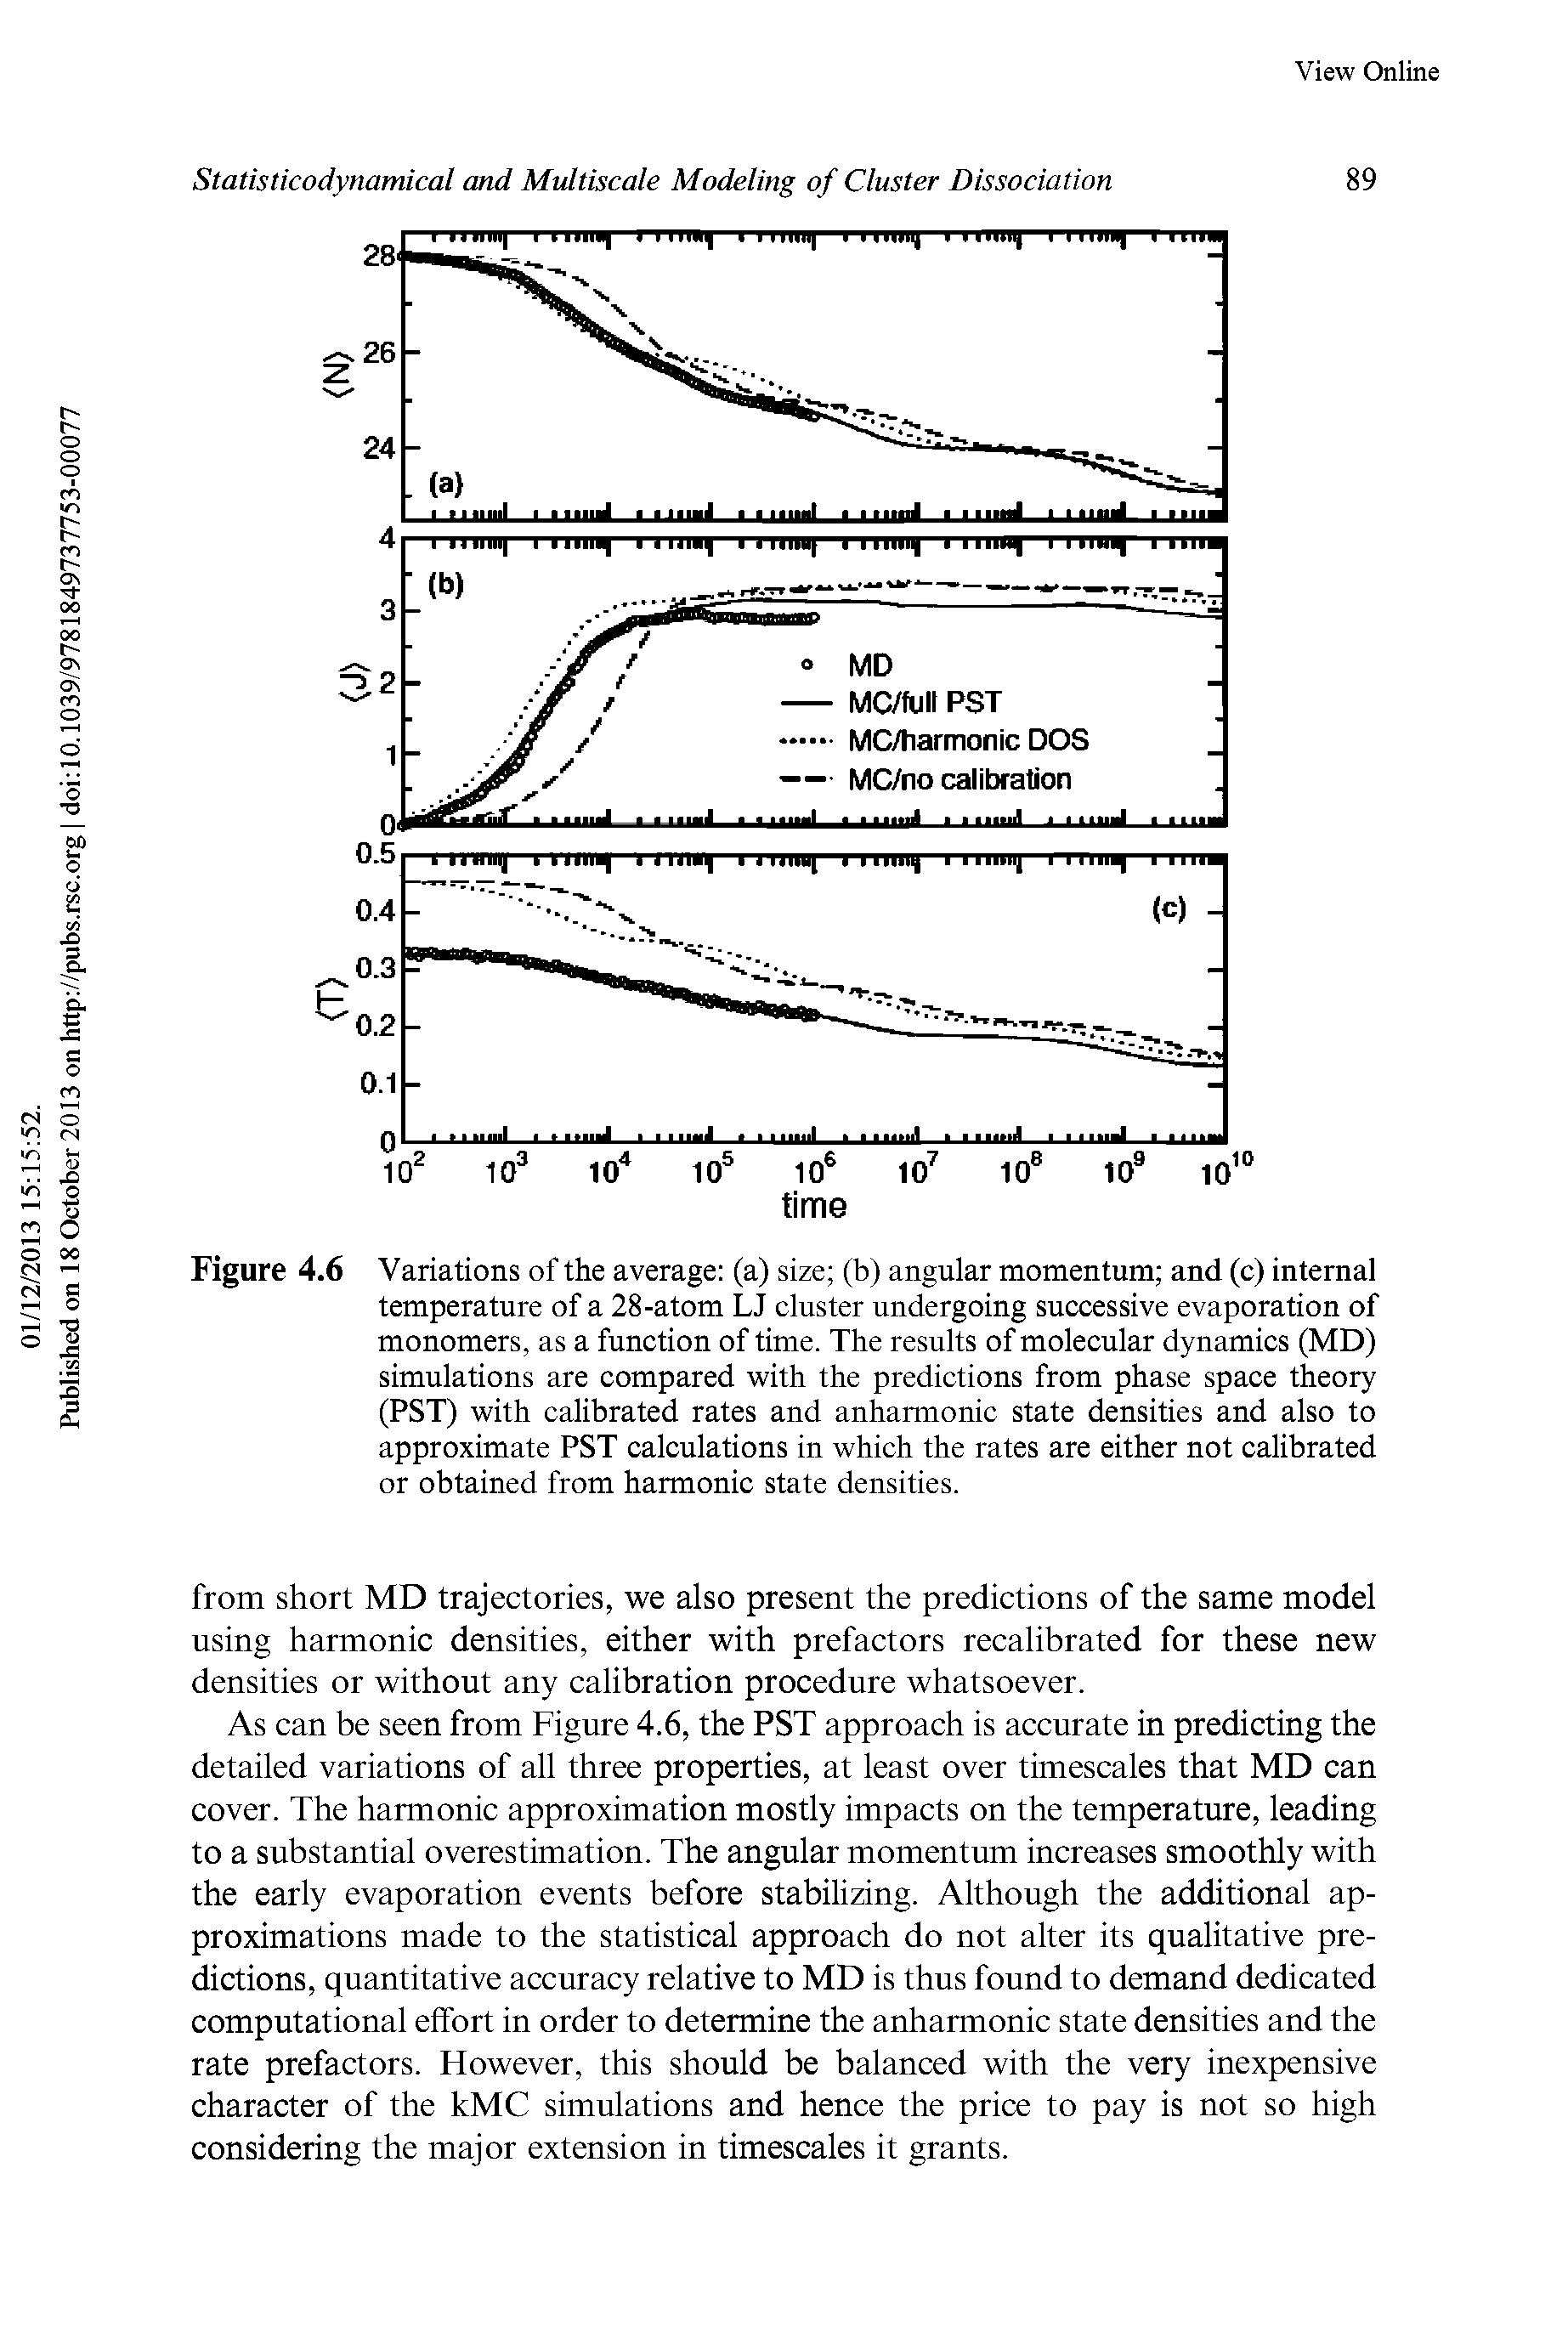 Figure 4.6 Variations of the average (a) size (b) angular momentum and (c) internal temperature of a 28-atom LJ cluster undergoing successive evaporation of monomers, as a function of time. The results of molecular dynamics (MD) simulations are compared with the predictions from phase space theory (PST) with calibrated rates and anharmonic state densities and also to approximate PST calculations in which the rates are either not calibrated or obtained from harmonic state densities.